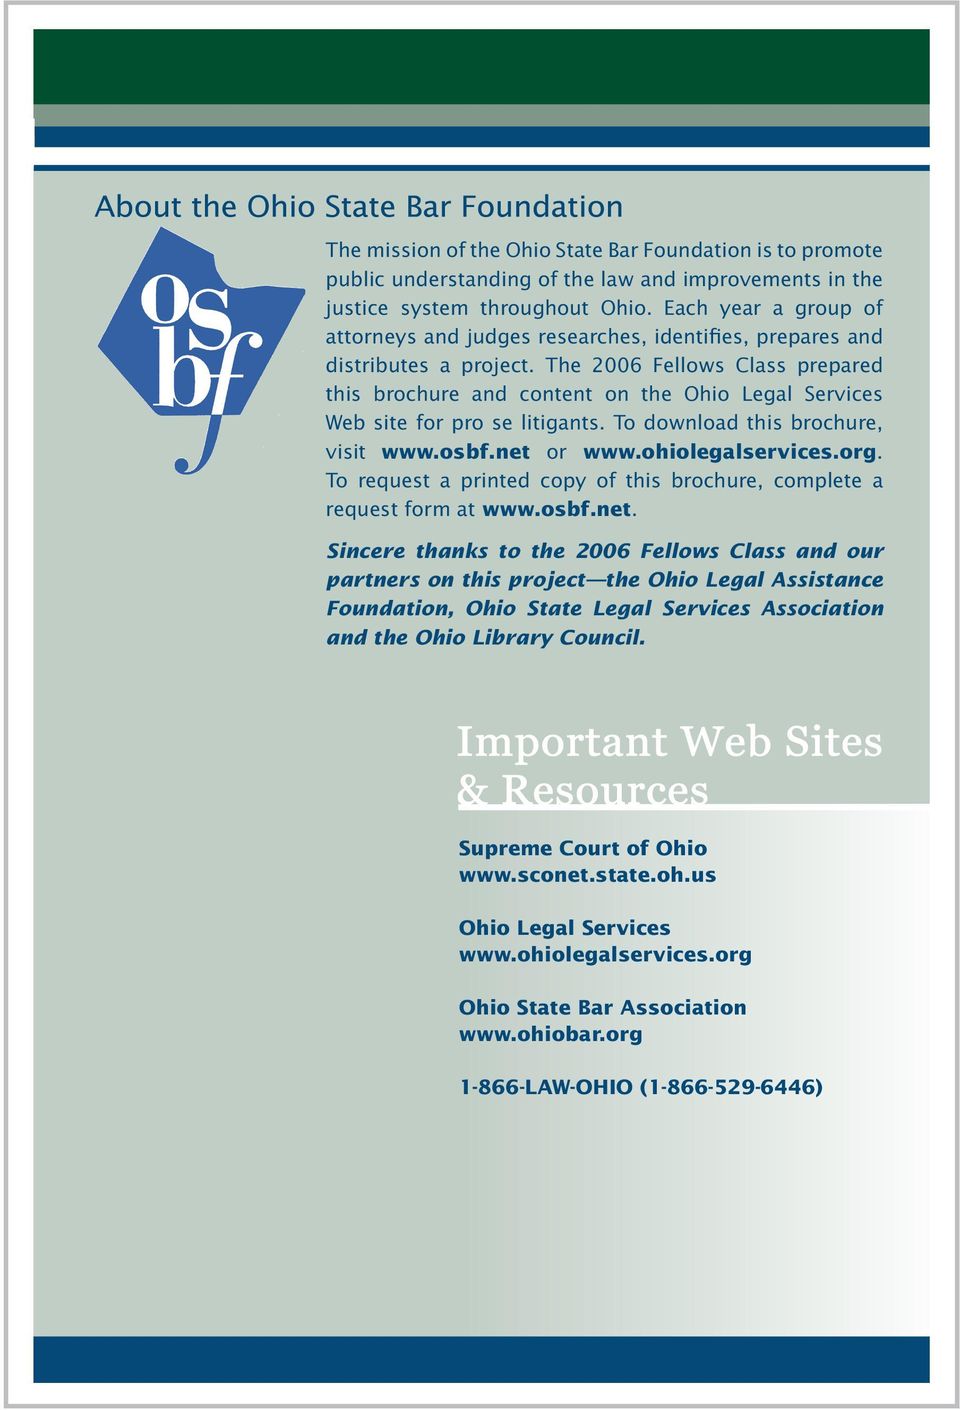 The 2006 Fellows Class prepared this brochure and content on the Ohio Legal Services Web site for pro se litigants. To download this brochure, visit www.osbf.net or www.ohiolegalservices.org.